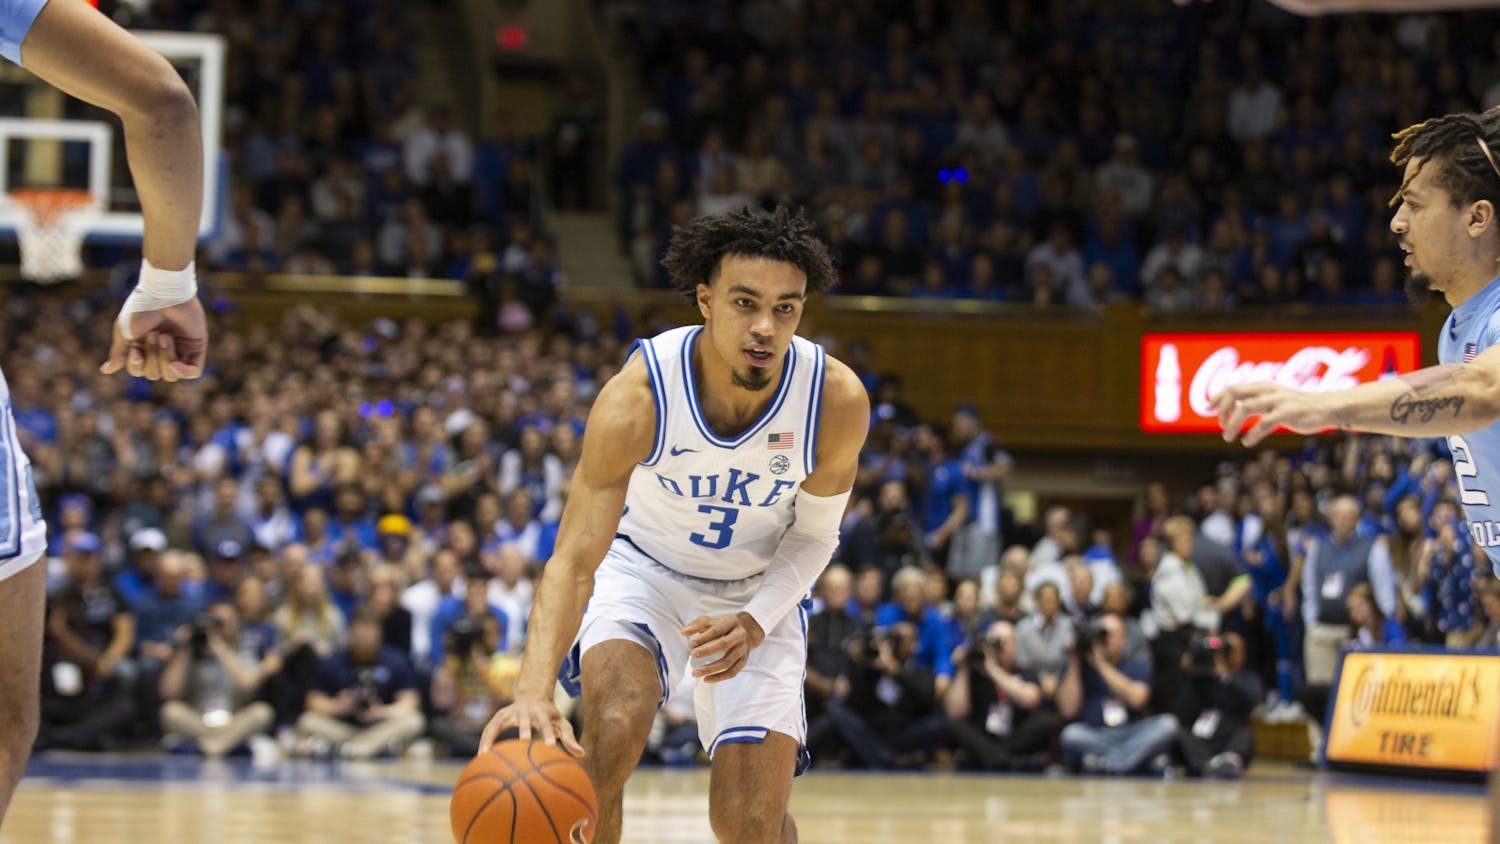 Offensive production outside of Tre Jones and Vernon Carey Jr. will be key for Duke heading into the ACC tournament.